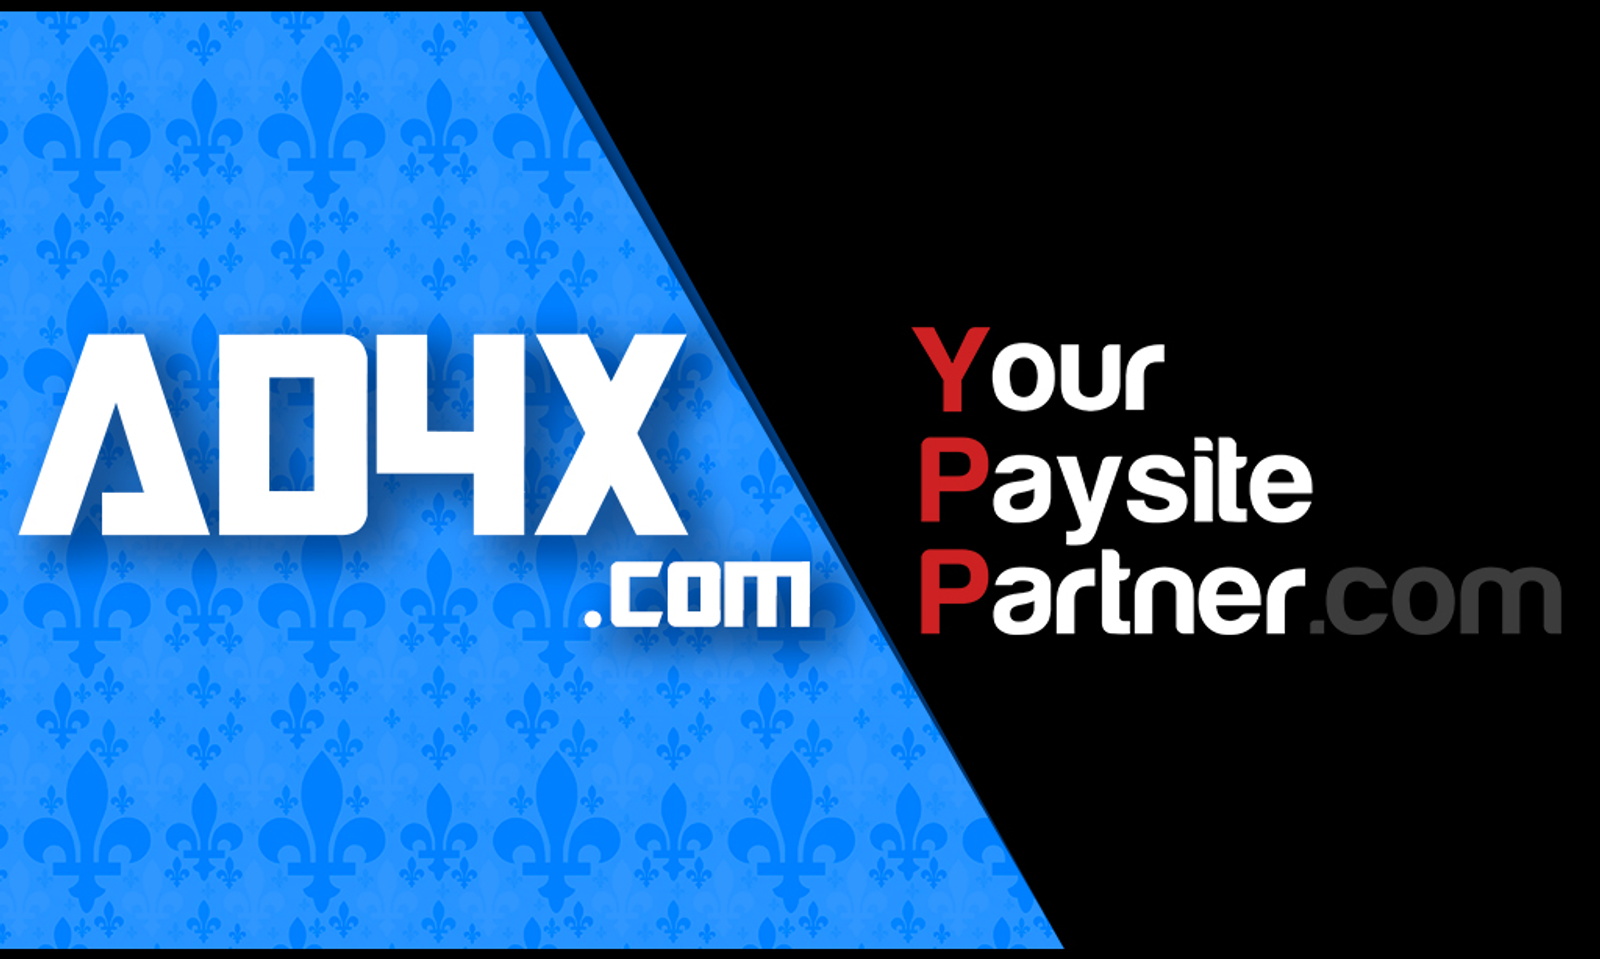 AD4X.com Teams With YourPaysitePartner For Site Relaunch